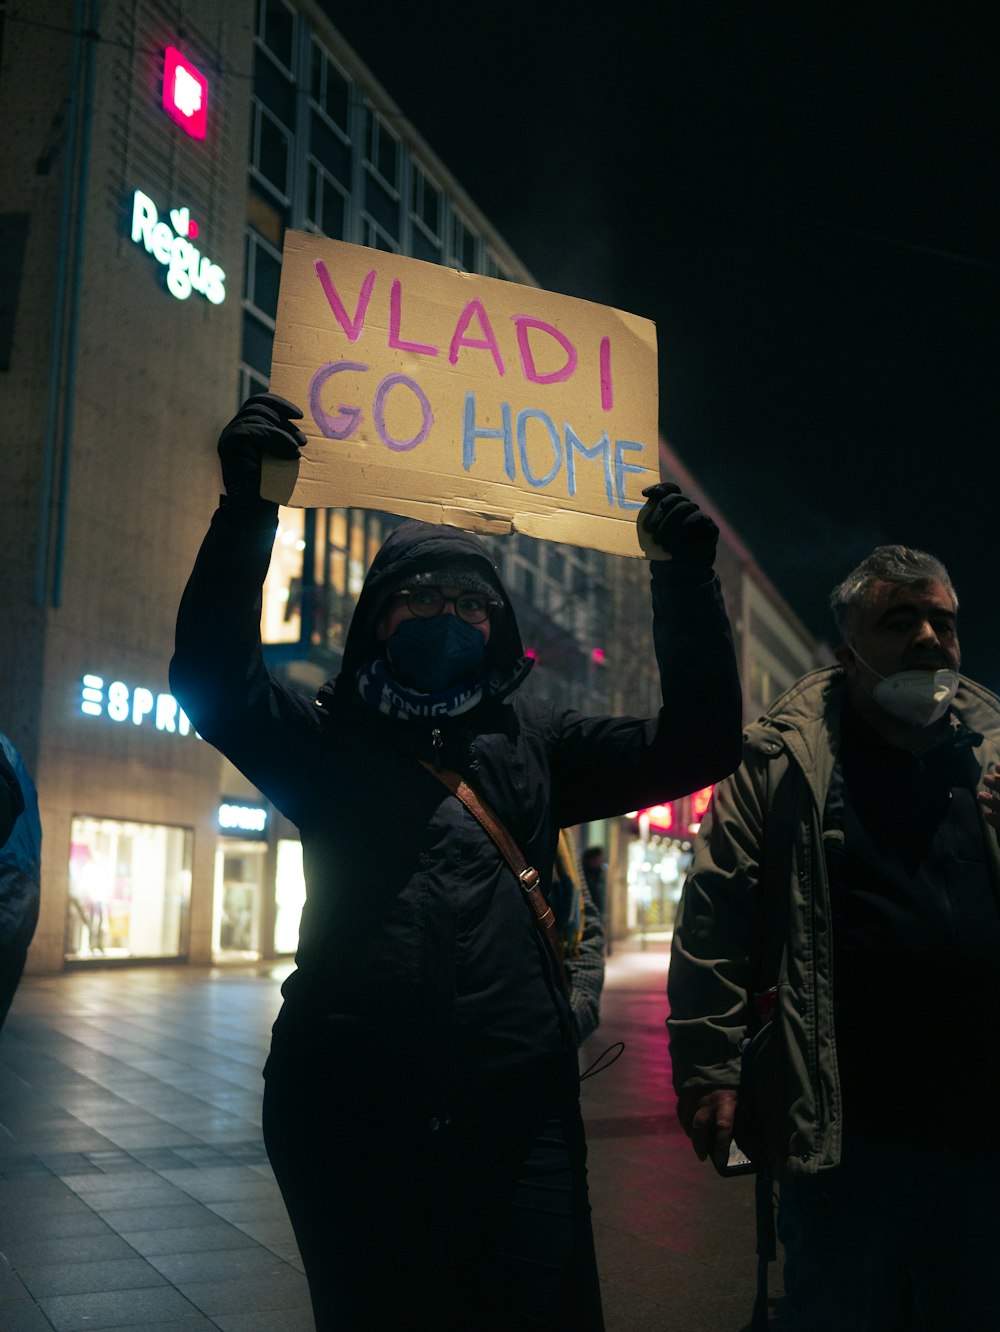 a person holding a sign that says vladi go home